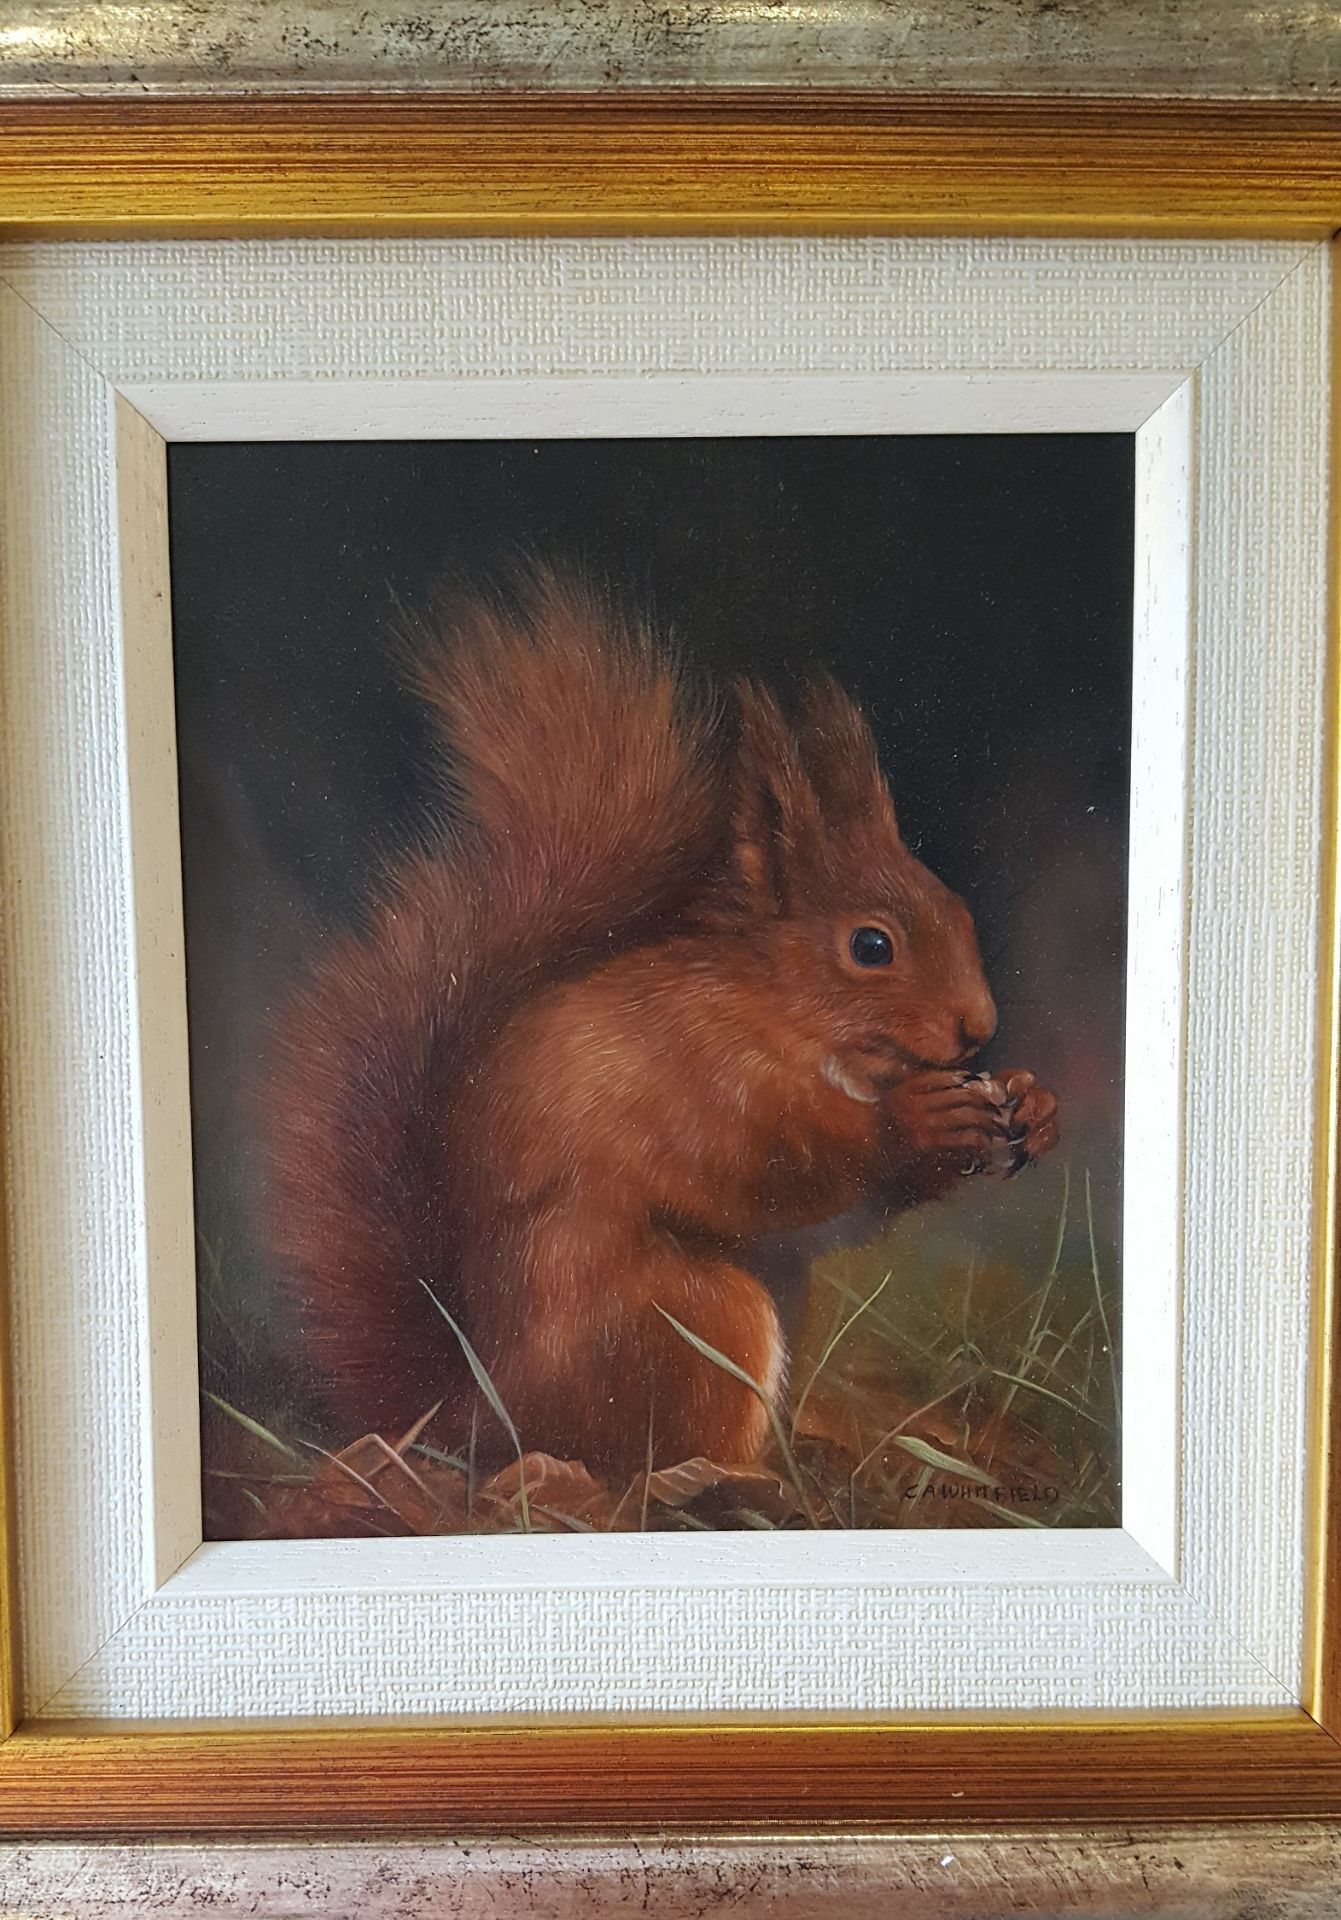 Original Art Framed Oil Painting on Board Red Squirrel signed lower right C A Whitfield - Image 3 of 3